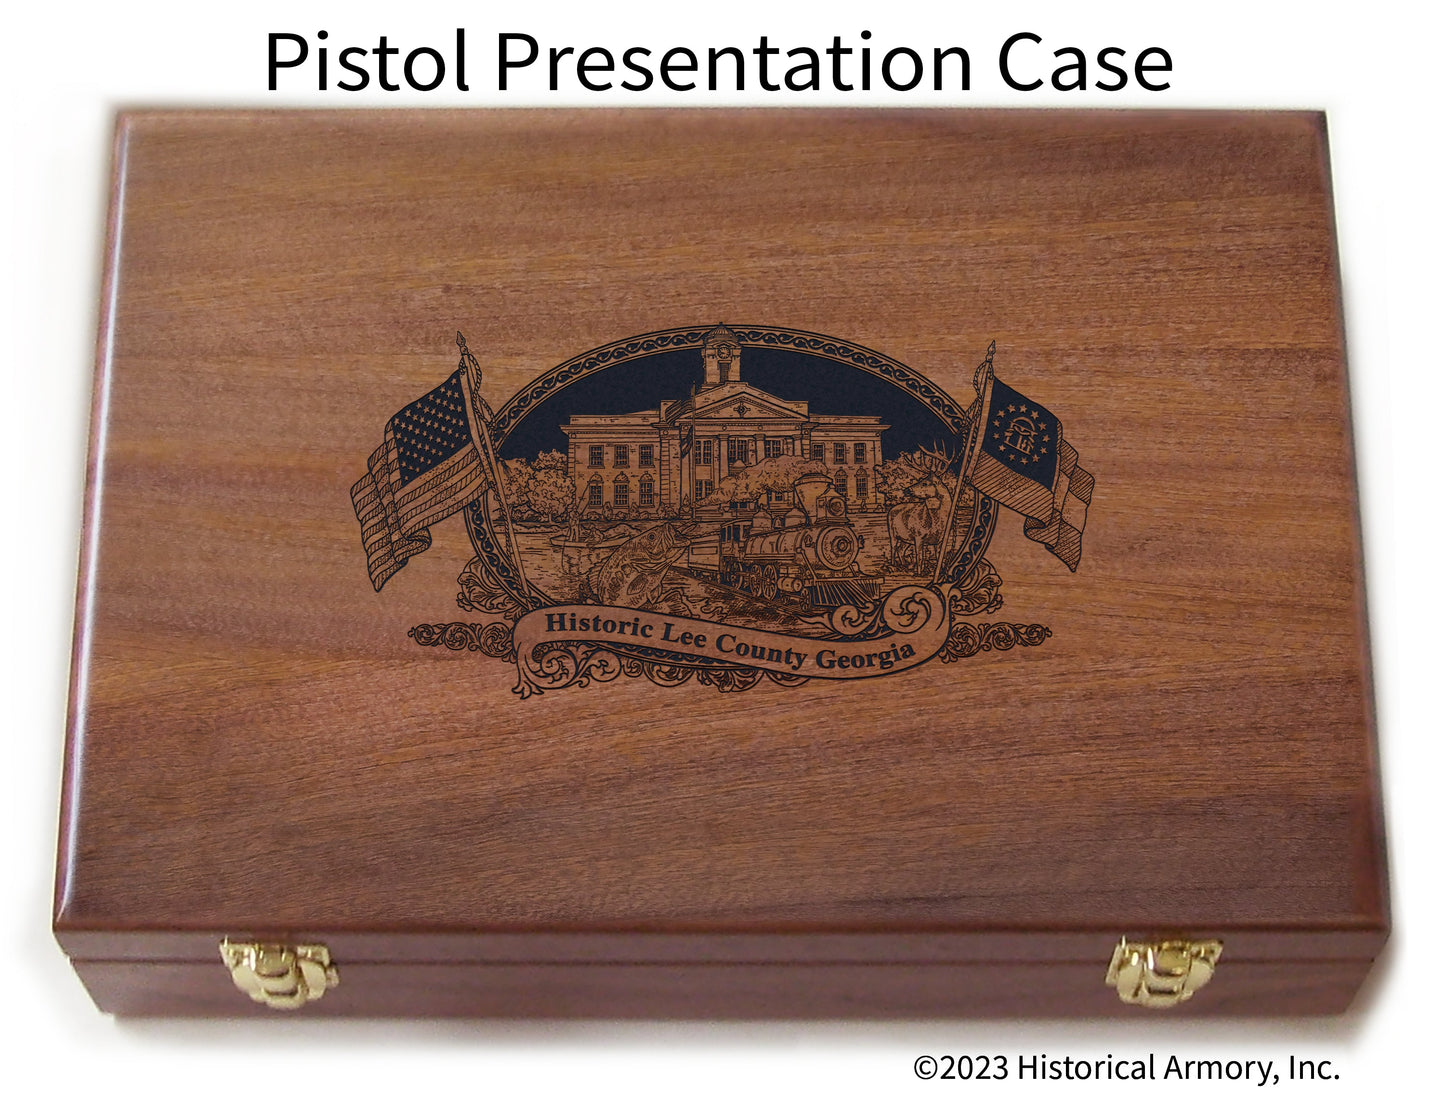 Lee County Georgia Engraved .45 Auto Ruger 1911 Presentation Case